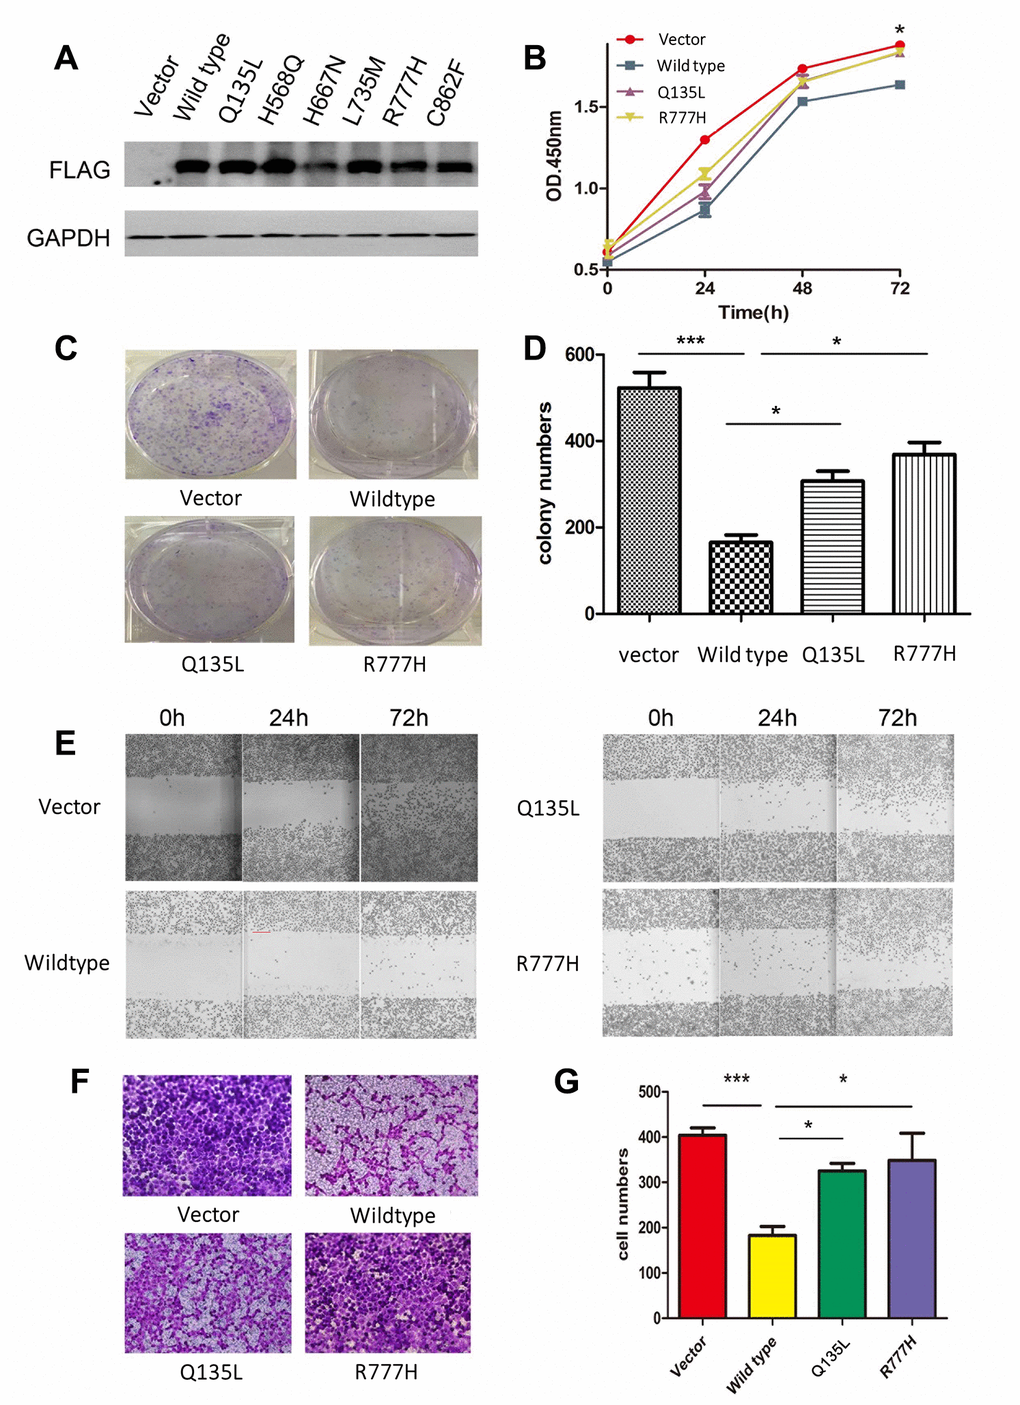 Overexpression of UNC5D inhibits lung cancer growth in vitro. (A) NCI-H1299 cells were infected with viruses harboring control vector, wild-type UNC5D, and UNC5D mutants, and protein expression was analyzed by Western blot. (B) The proliferation of cells overexpressing the vector, UNC5D-WT, UNC5D-Q135L, and UNC5D-R777H was determined by Cell Counting Kit-8 analysis. (C, D) Colony formation assays were conducted to evaluate the effect of UNC5D overexpression on the growth of lung cancer cells. (E) The mobility of UNC5D-overexpressing cells was assessed by wound healing analysis. (F, G) Cell migration analysis was determined by a Transwell assay using cells expressing the vector, wild-type UNC5D, and UNC5D mutants. *P P 